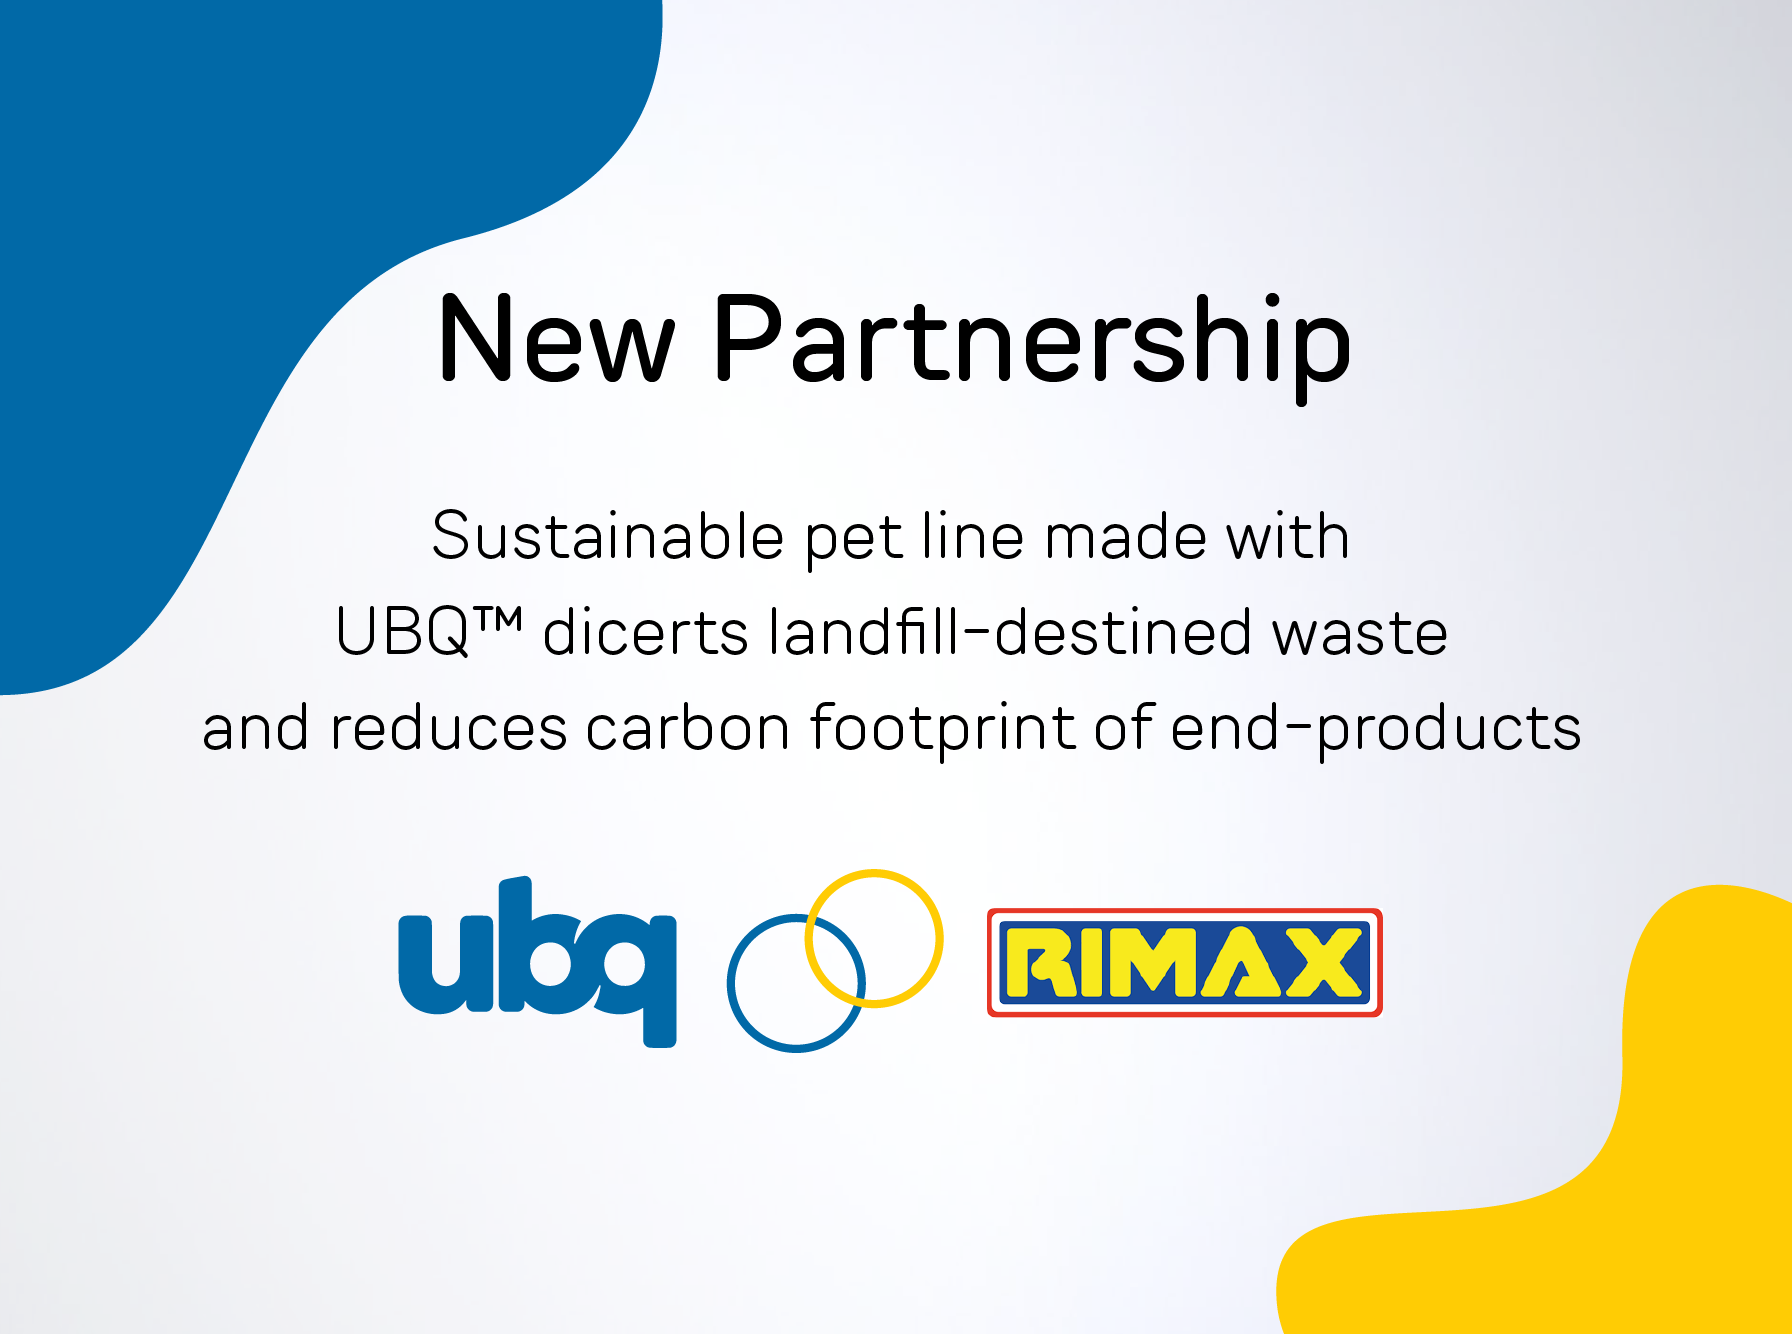 Rimax introduces consumer goods made with waste-based UBQ™ as eco-wise choice for pet owners